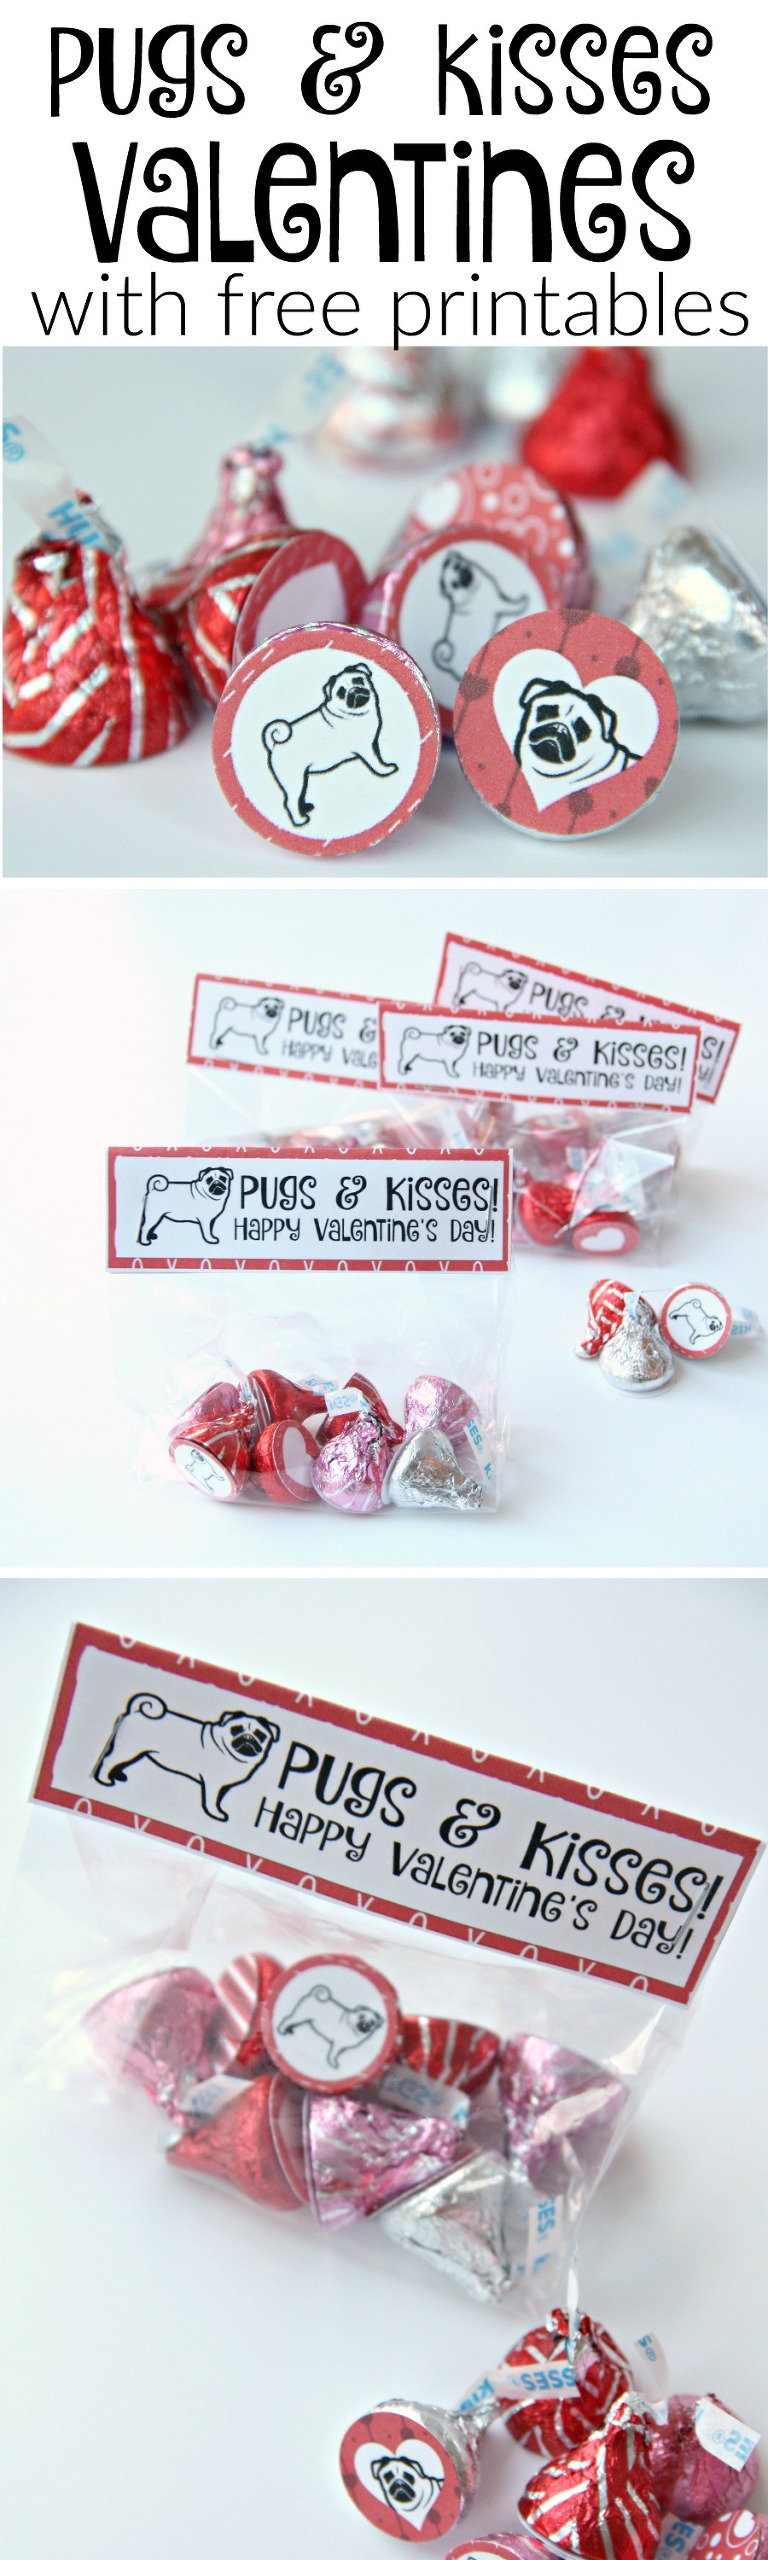 Pugs and Kisses Valentines with free printables for valentines and hershey's hugs and kisses